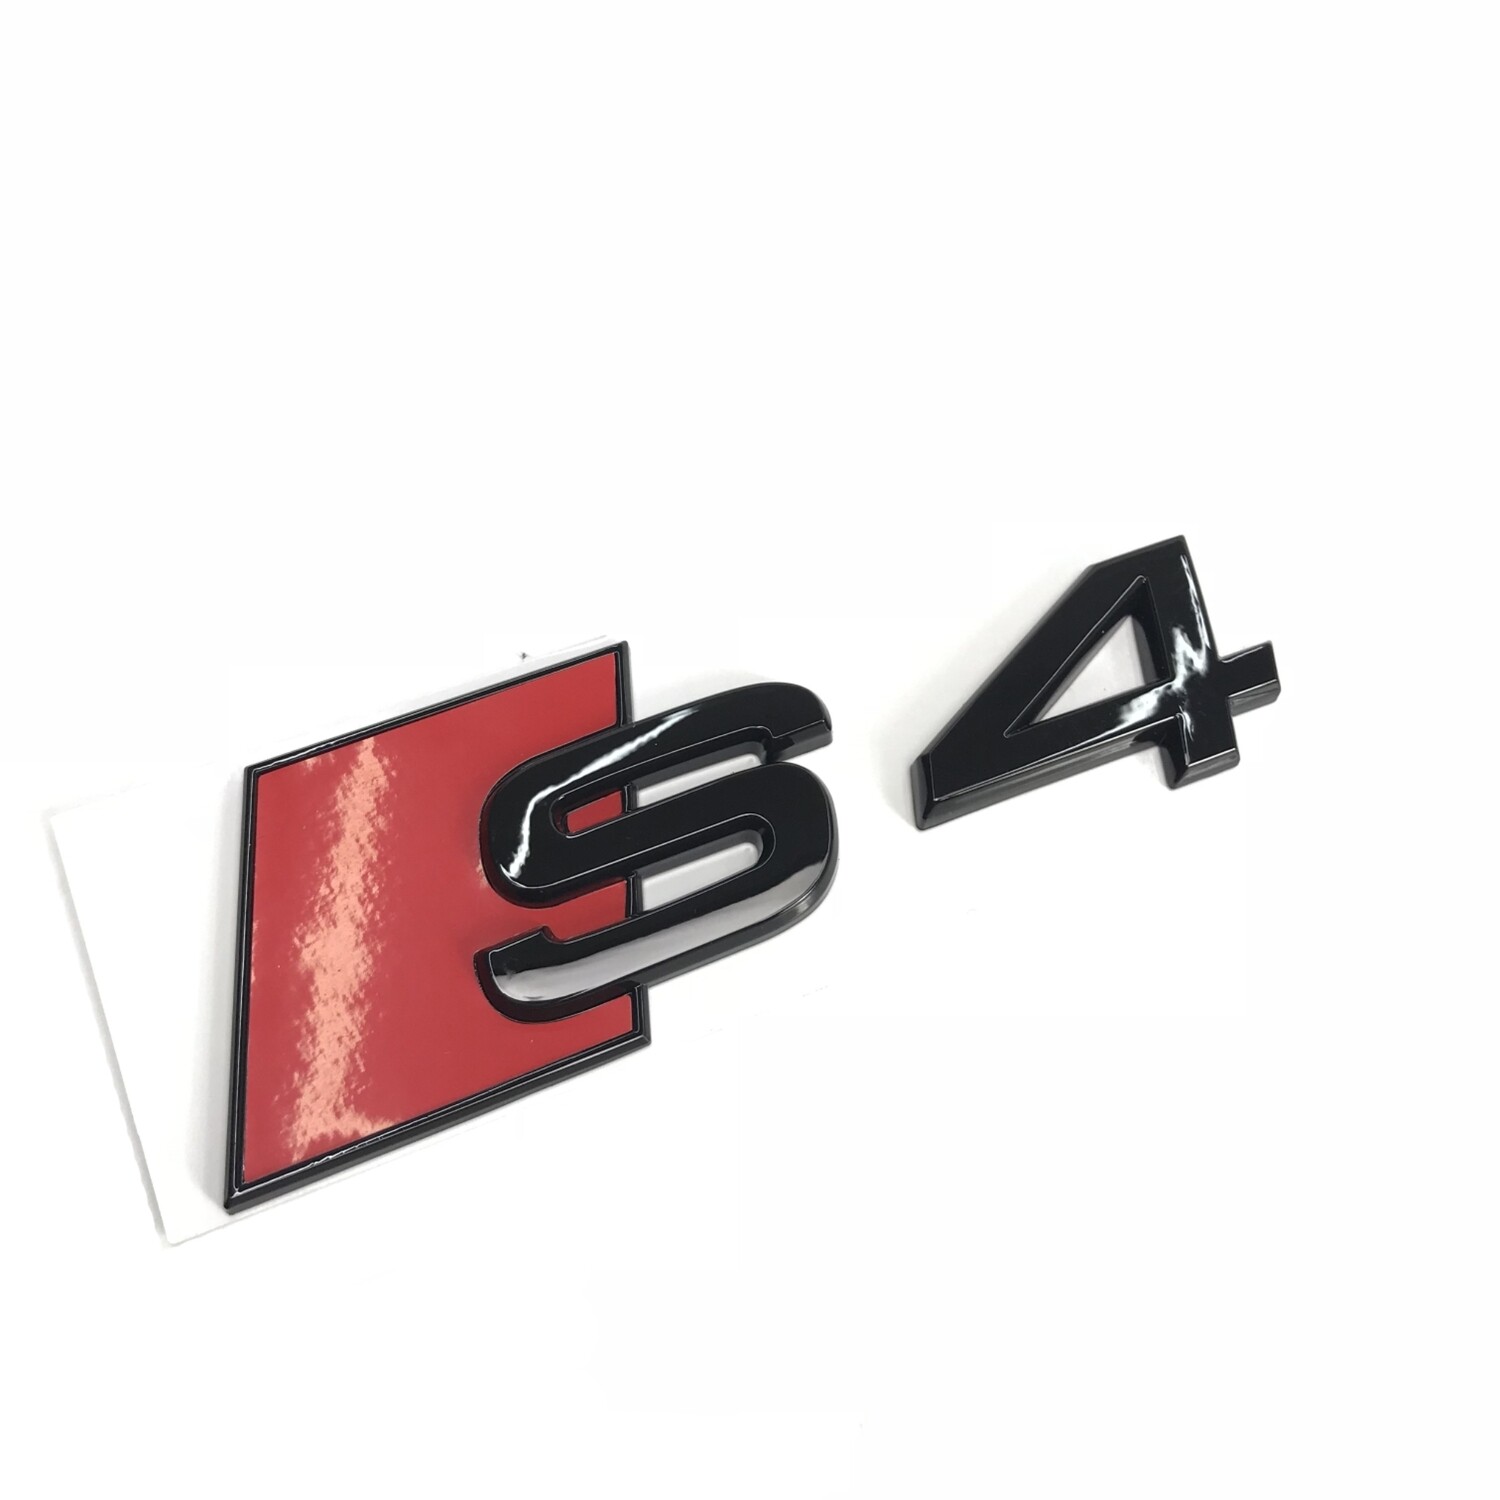 Audi S4 black replacement rear boot trunk badge emblem adhesive stick on